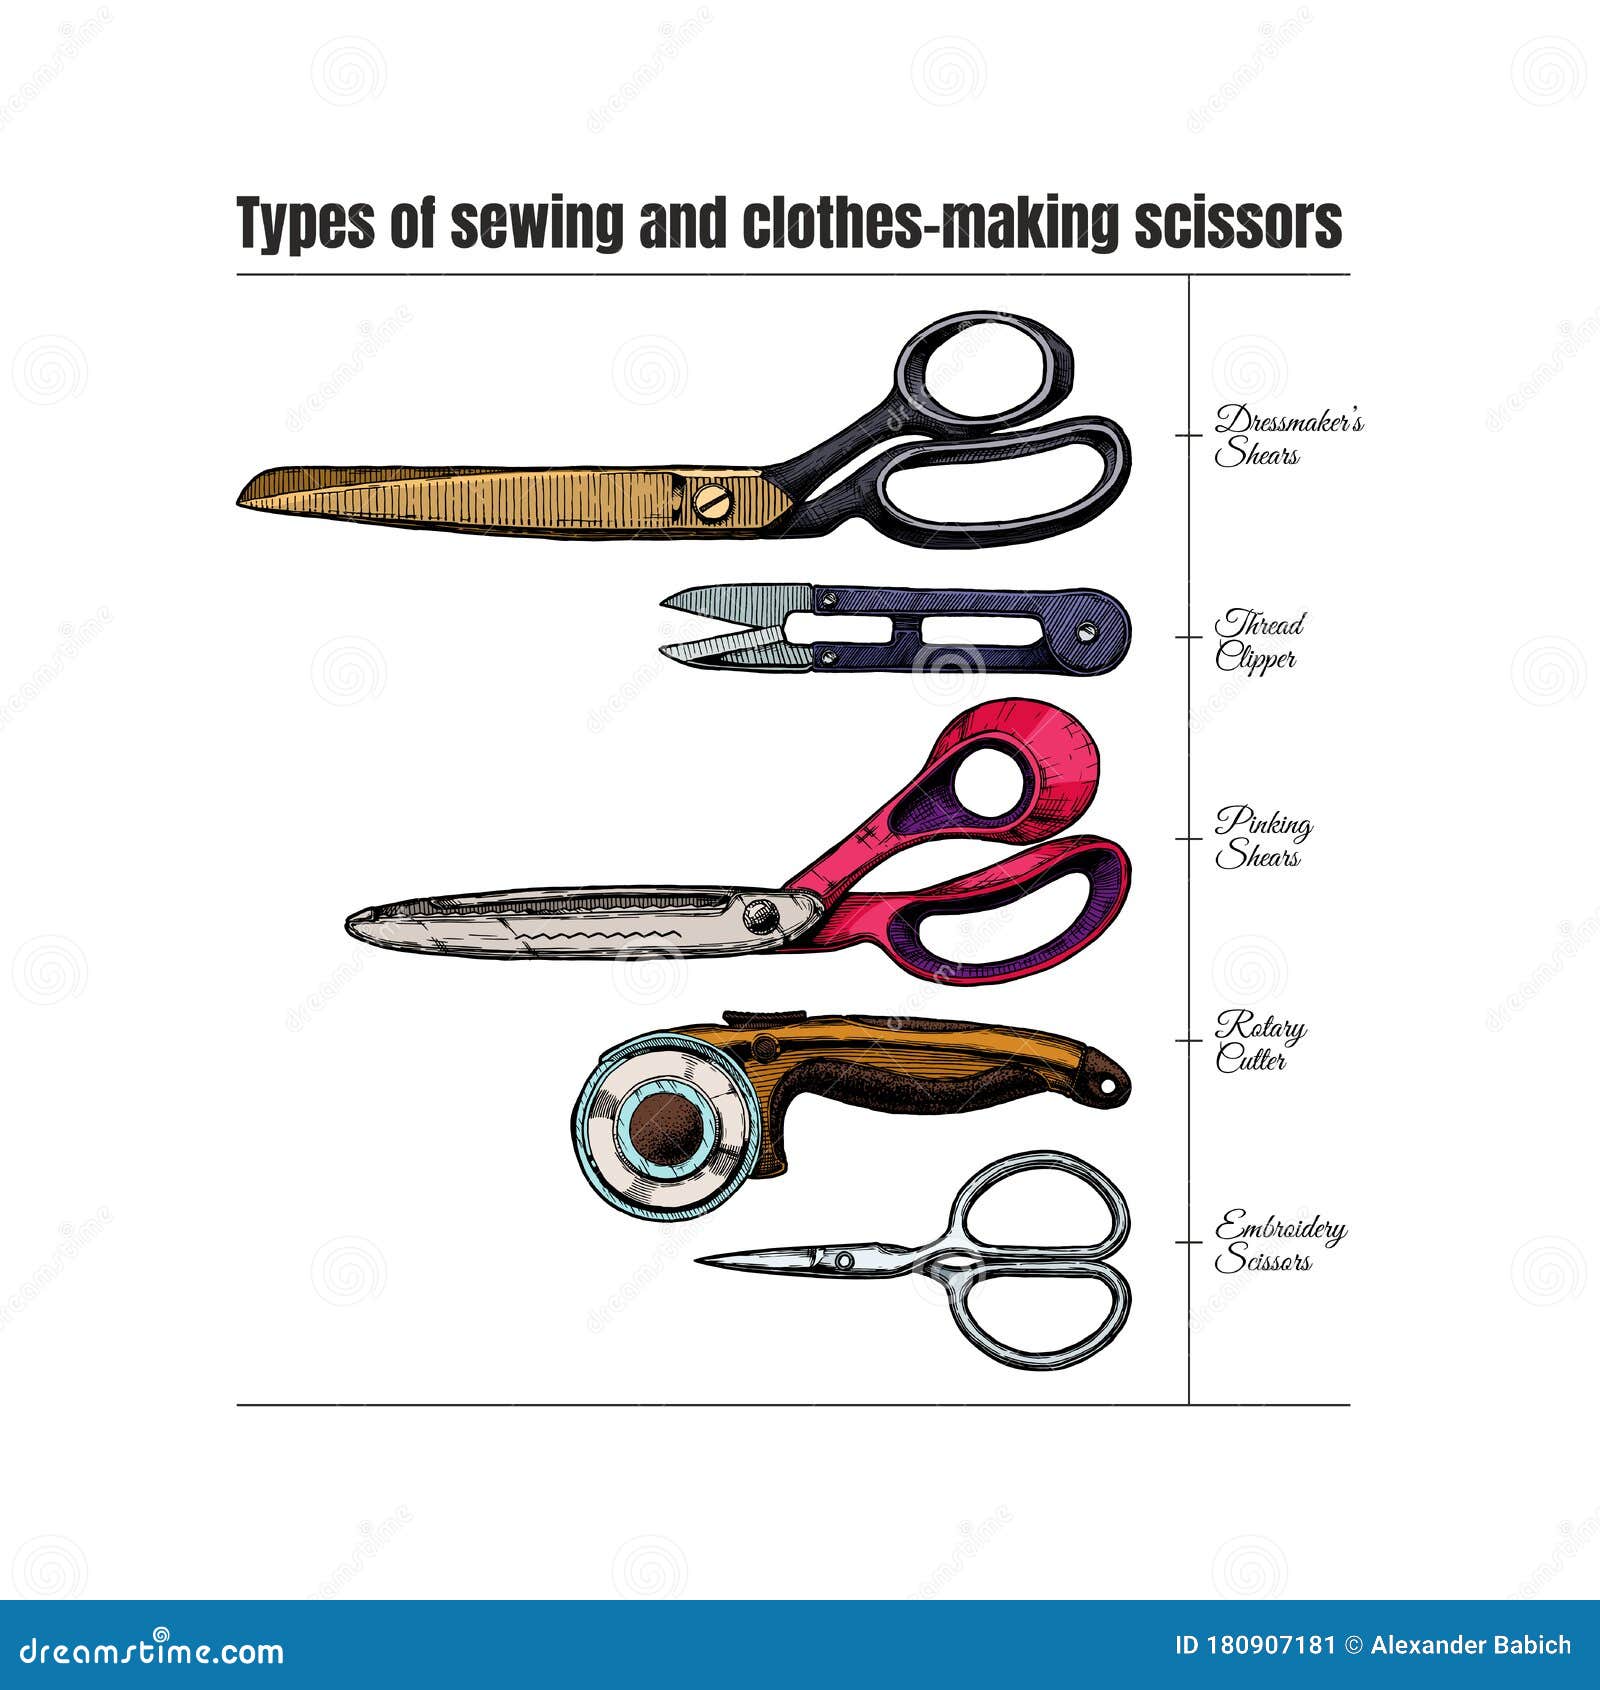 Types Of Sewing And Clothes Making Scissors Stock Vector Illustration Of Sewing Engraved 180907181